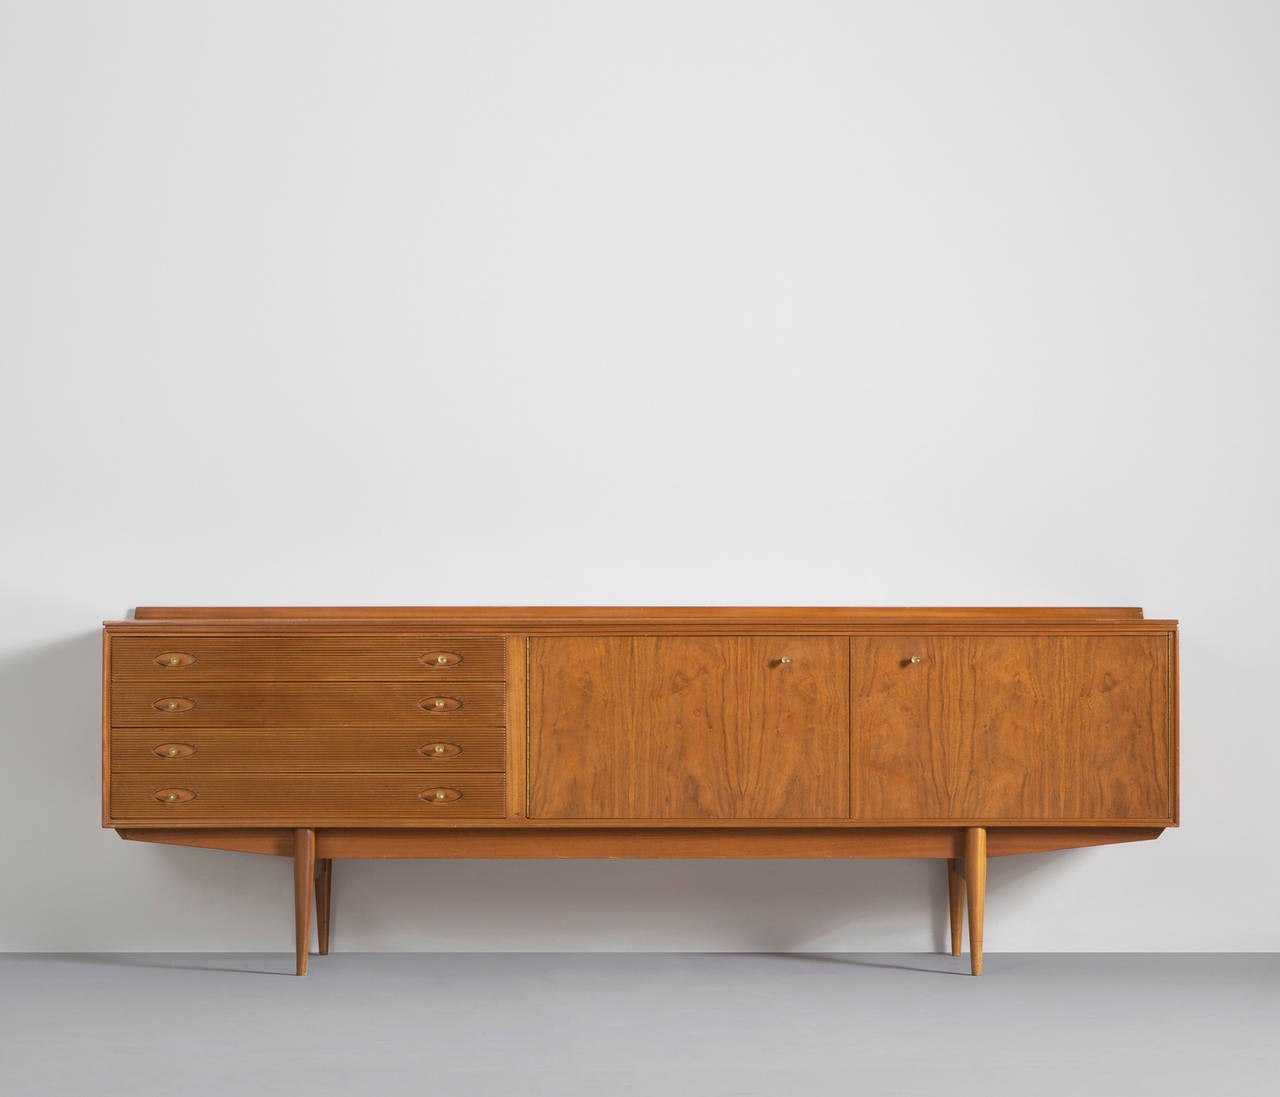 A rare sideboard designed by Robert Heritage.

This sideboard is equiped with a drawer section with 4 drawers and a large storage unit. The drawers are detailed with ridged fronts and brass handles based on tapered legs.

Designer Robert